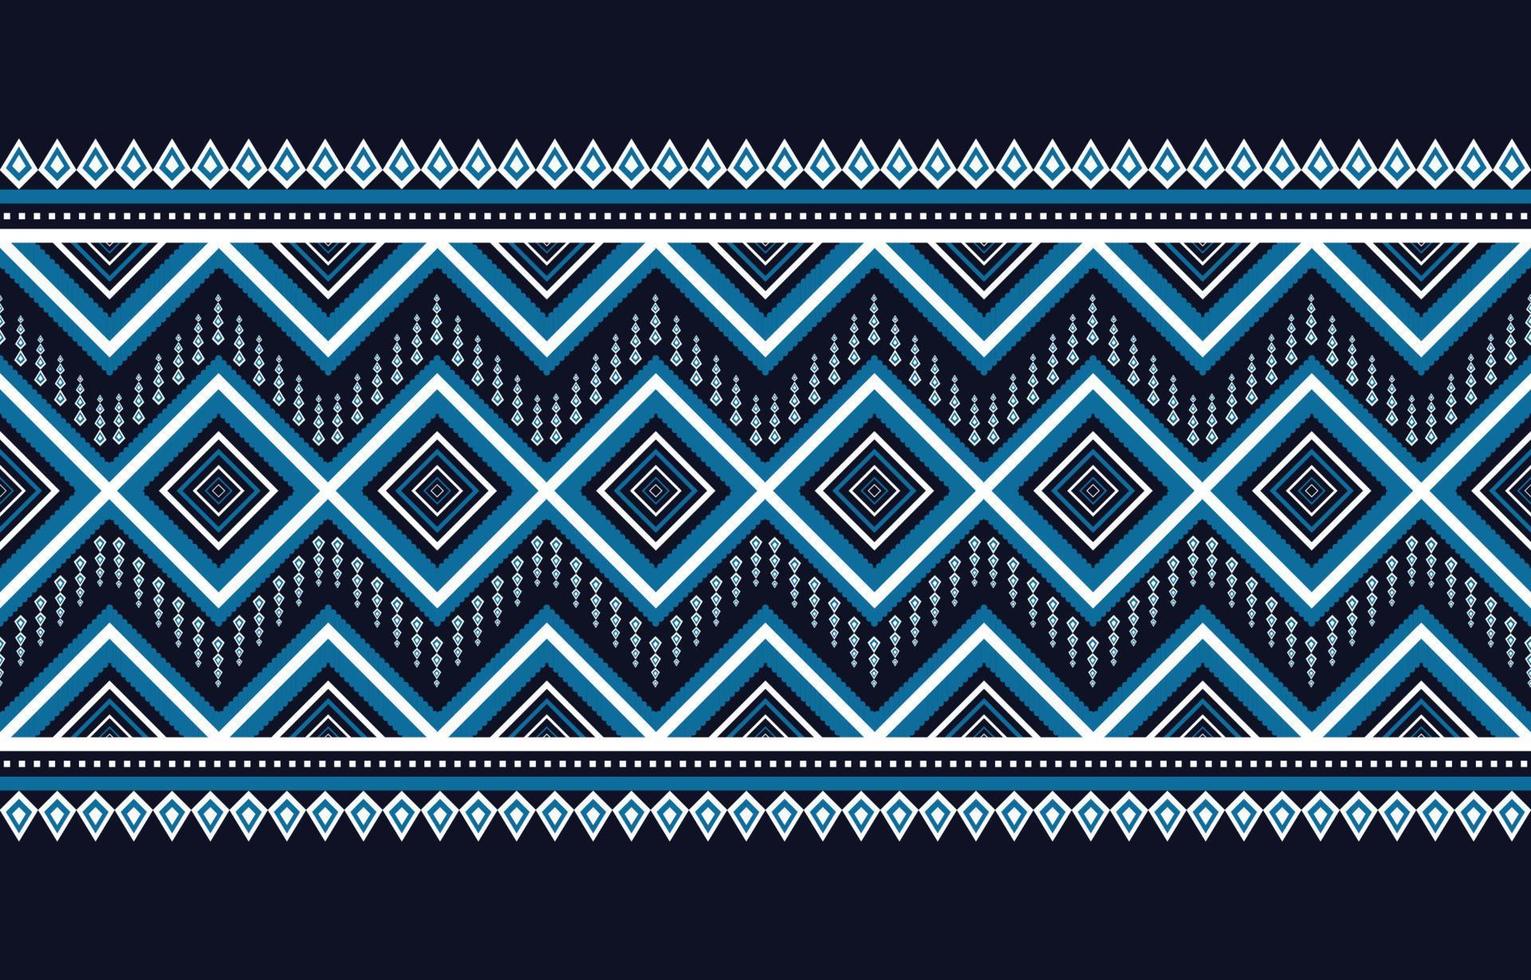 Tribal pattern navy blue and white traditional textiles abstract ethnic geometric pattern Designs for background or wallpaper, carpets, batik vector illustration